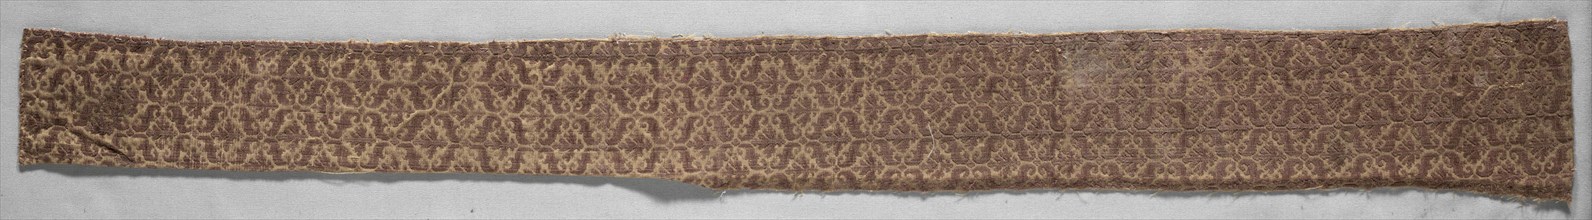 Velvet Band, 1500s-1600s. Italy, 16th-17th century. Velvet (cut and uncut); silk and metal thread;